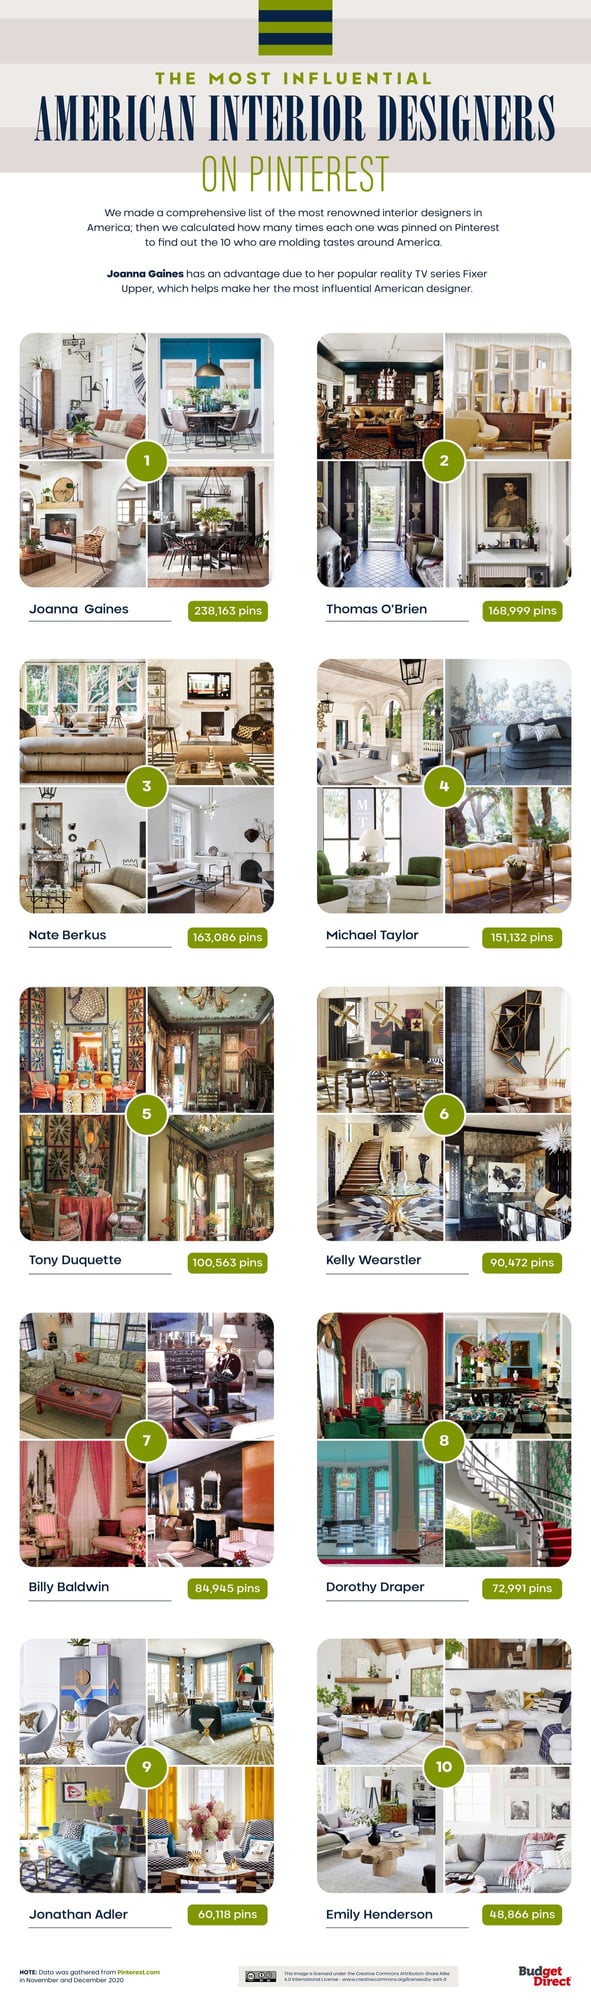 Budget Direct Home Insurance's Most Influential American Interior Designers on Pinterest